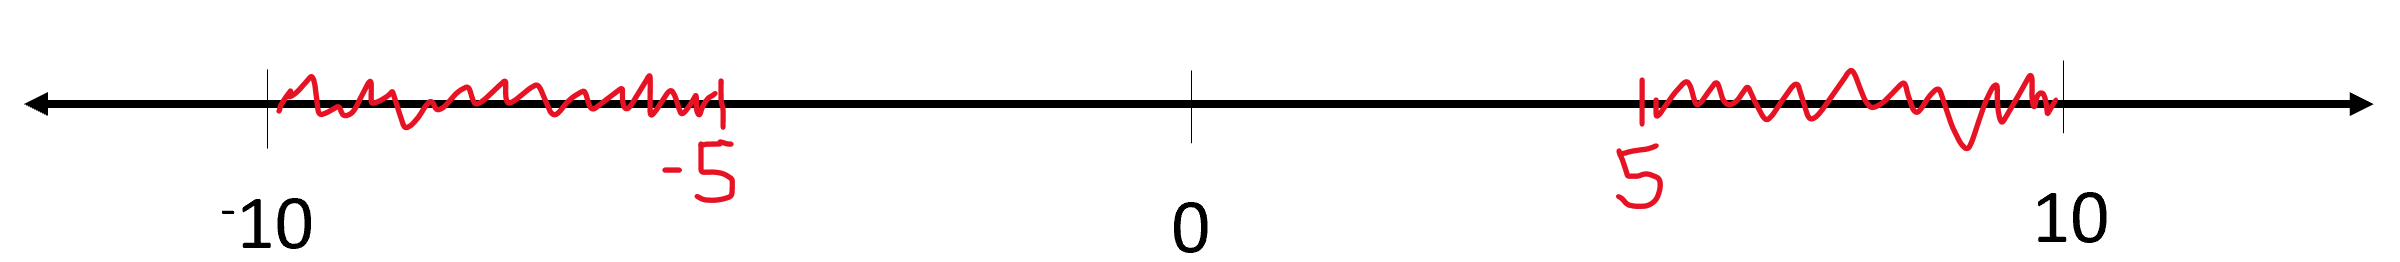 Number line with -10, -5, 0, 5, and 10 marked. The lines above 5 and below -5 are scribbled out.